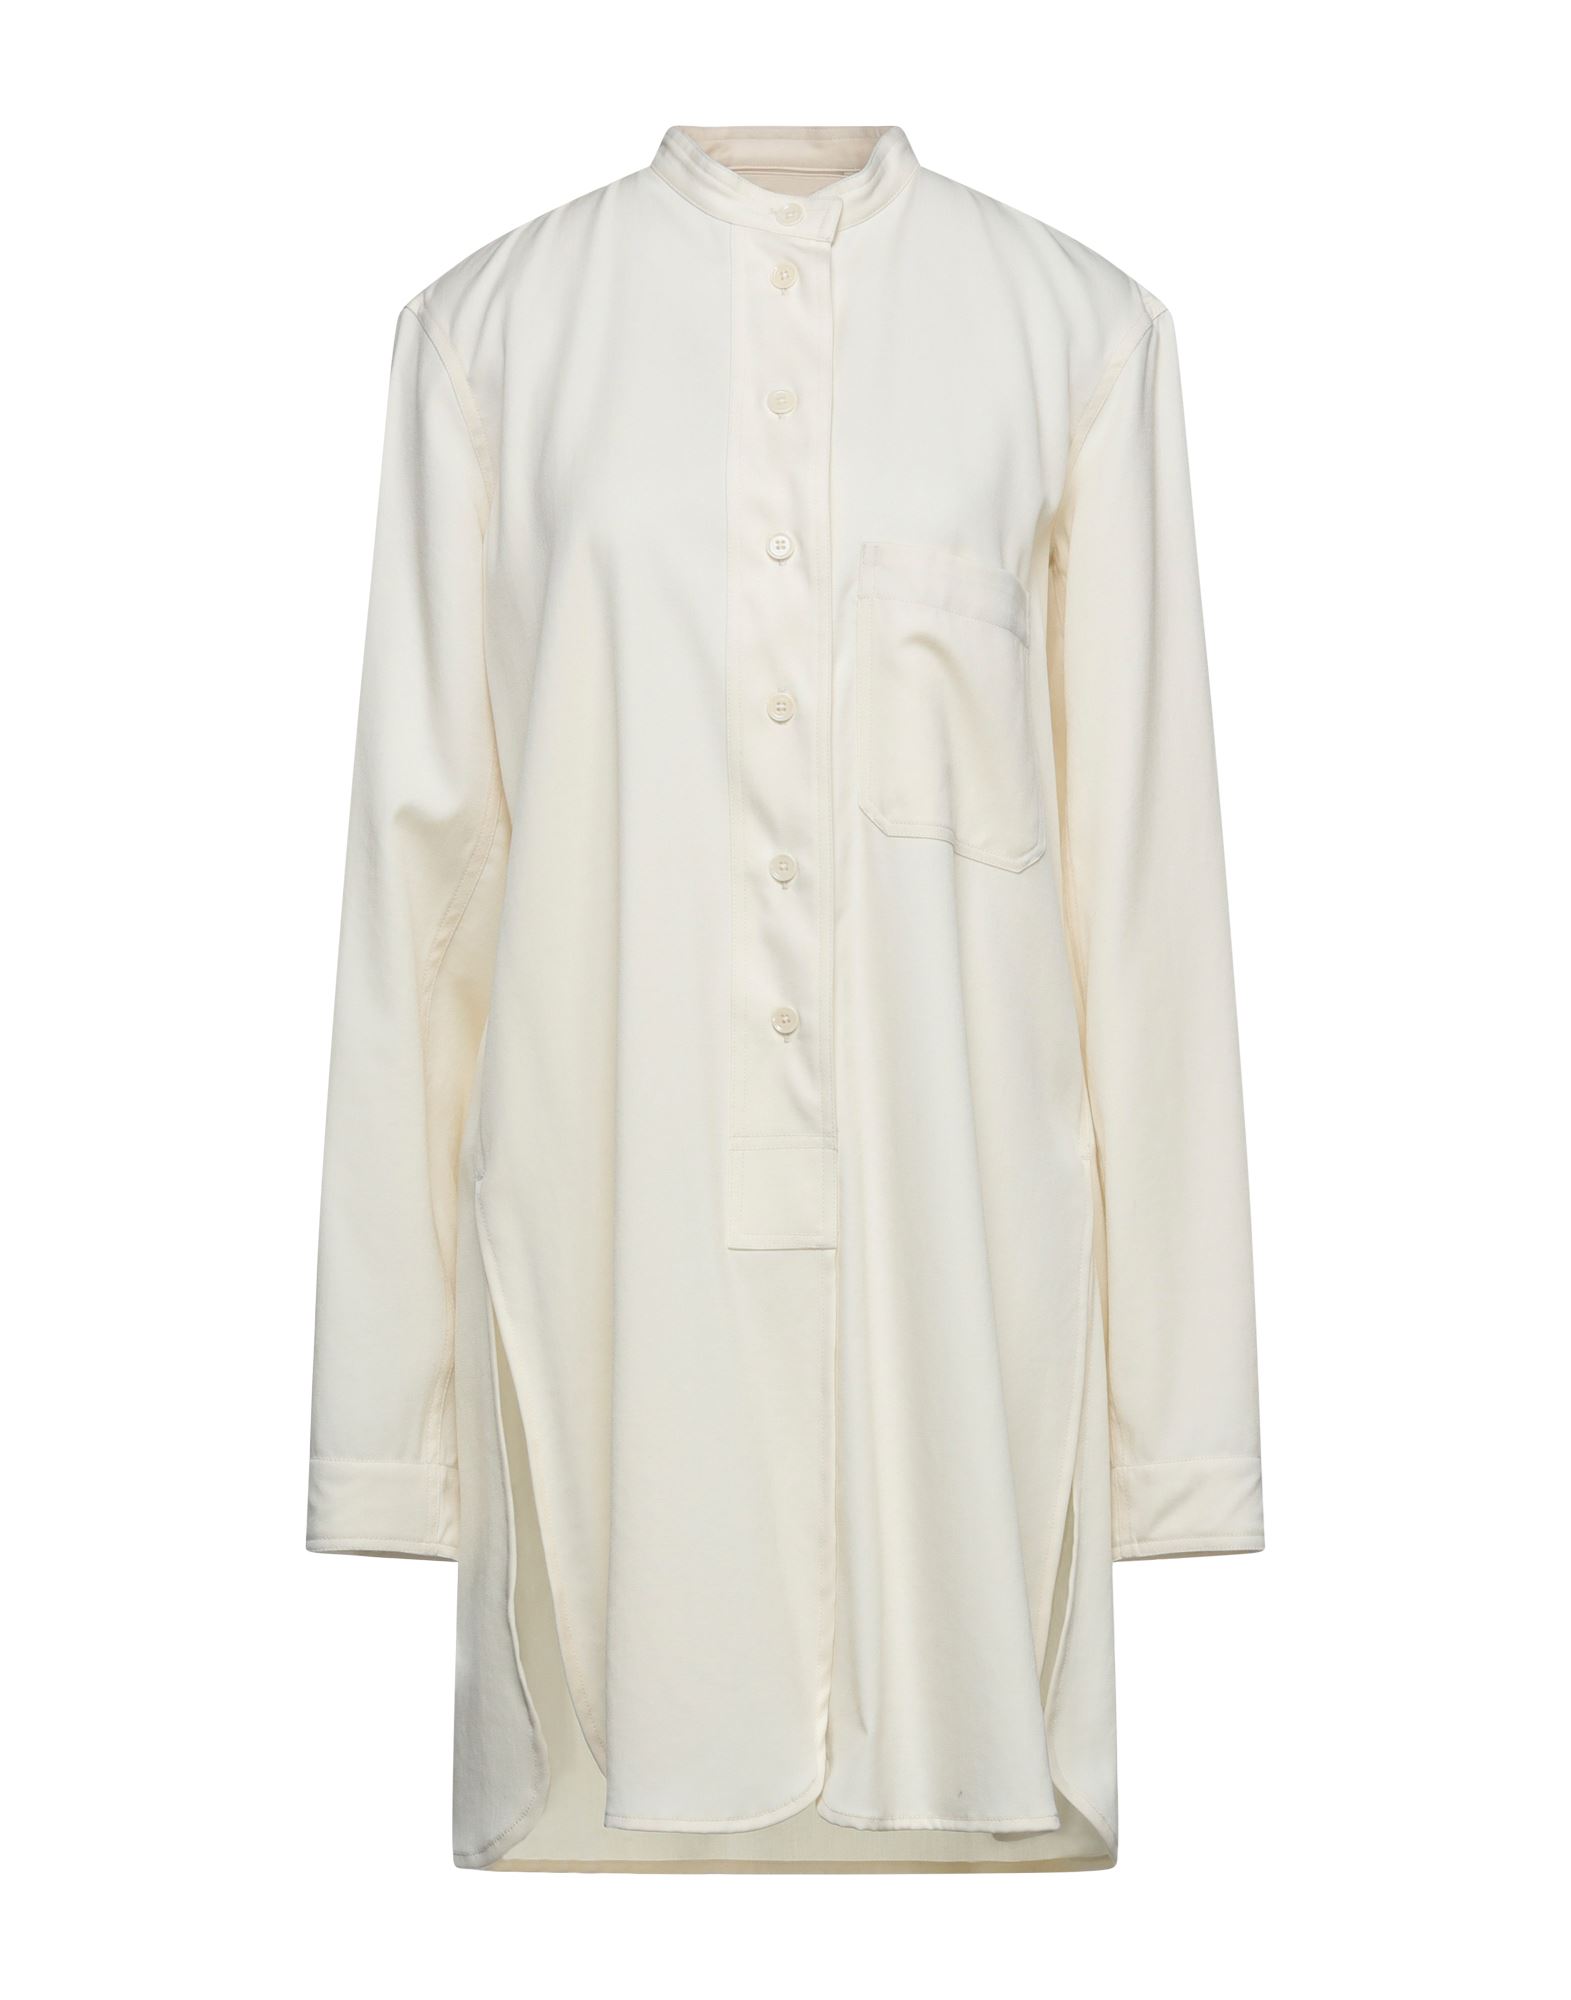 Lemaire Shirts In Ivory